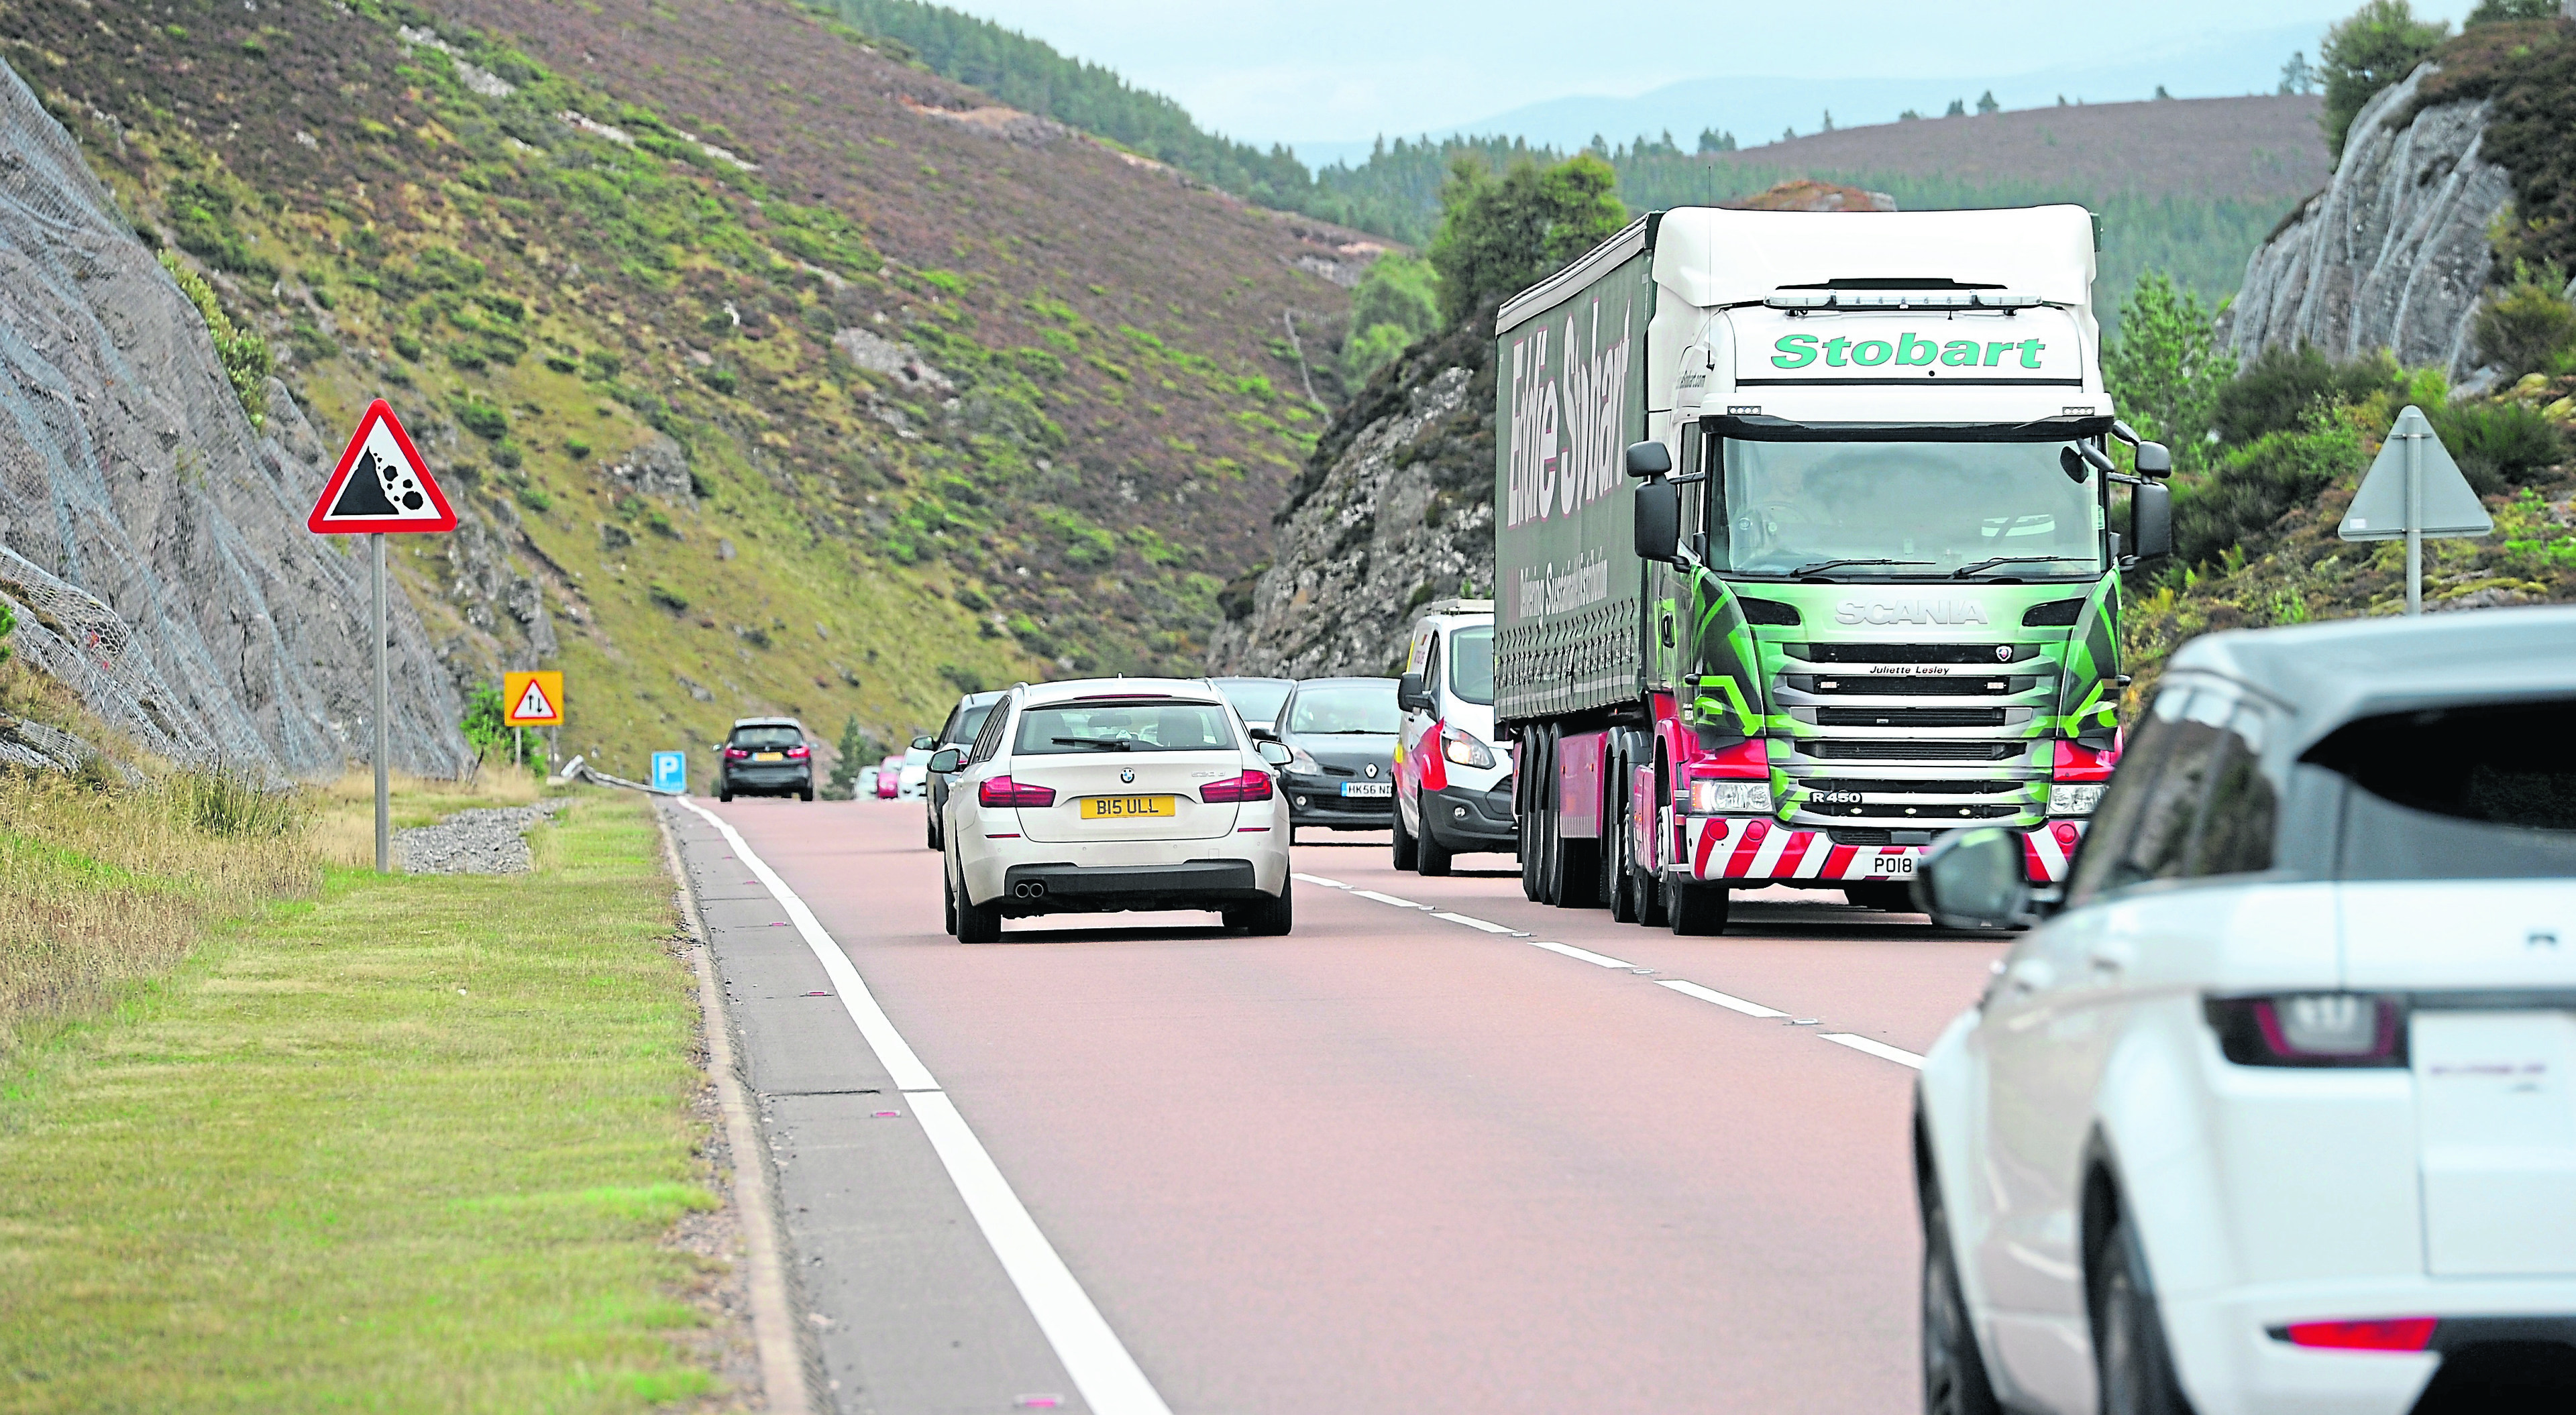 Section of the A9 dualling will see another two lanes of road threaded through the rock at Slochd, north of Carrbridge.